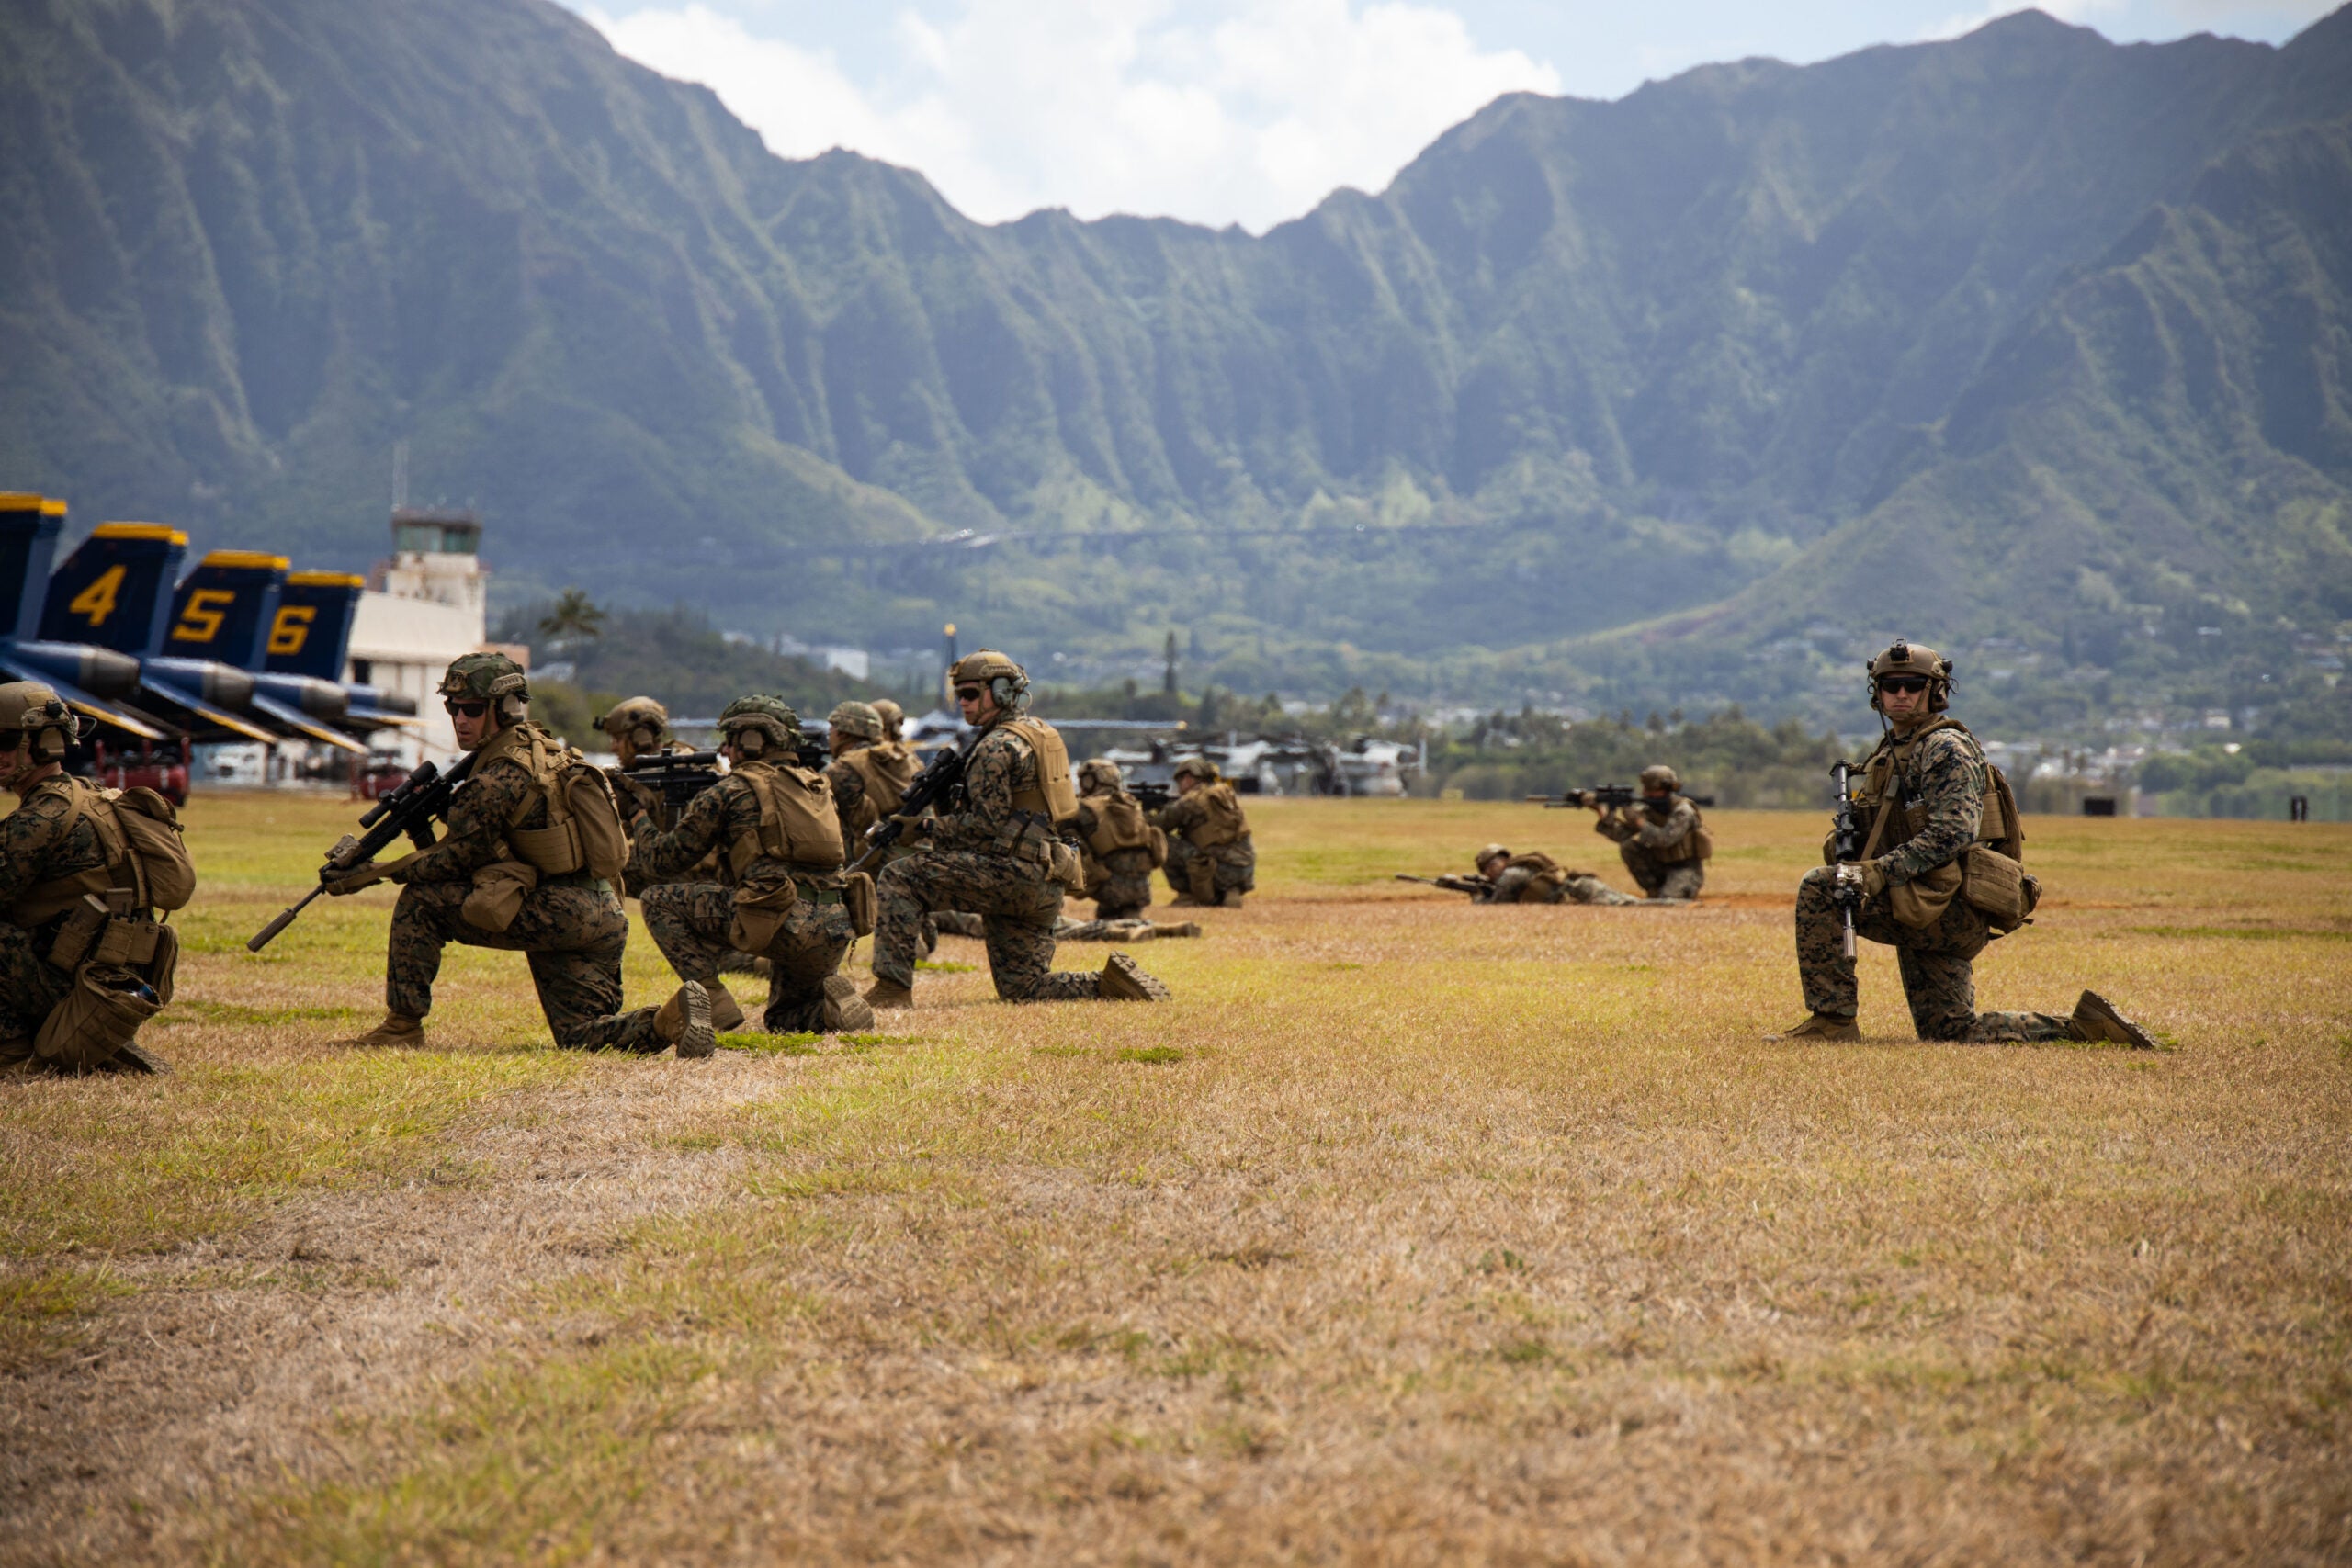 U.S. Marines with 3d Littoral Combat Team, 3rd Marine Littoral Regiment, take a knee and survey the surrounding area during a Joint Air-Ground Task Force Demonstration as part of the 2022 Kaneohe Bay Air Show, Marine Corps Air Station Kaneohe Bay, Marine Corps Base Hawaii, Aug. 13, 2022. The air show provided an opportunity to showcase the aircraft, equipment and capabilities of the armed forces to the local community. The Kaneohe Bay Air Show, which contained aerial performances, static displays, demonstrations and vendors, was designed to celebrate MCBH’s longstanding relationship with the local community. (U.S. Marine Corps photo by Cpl. Brandon Aultman)